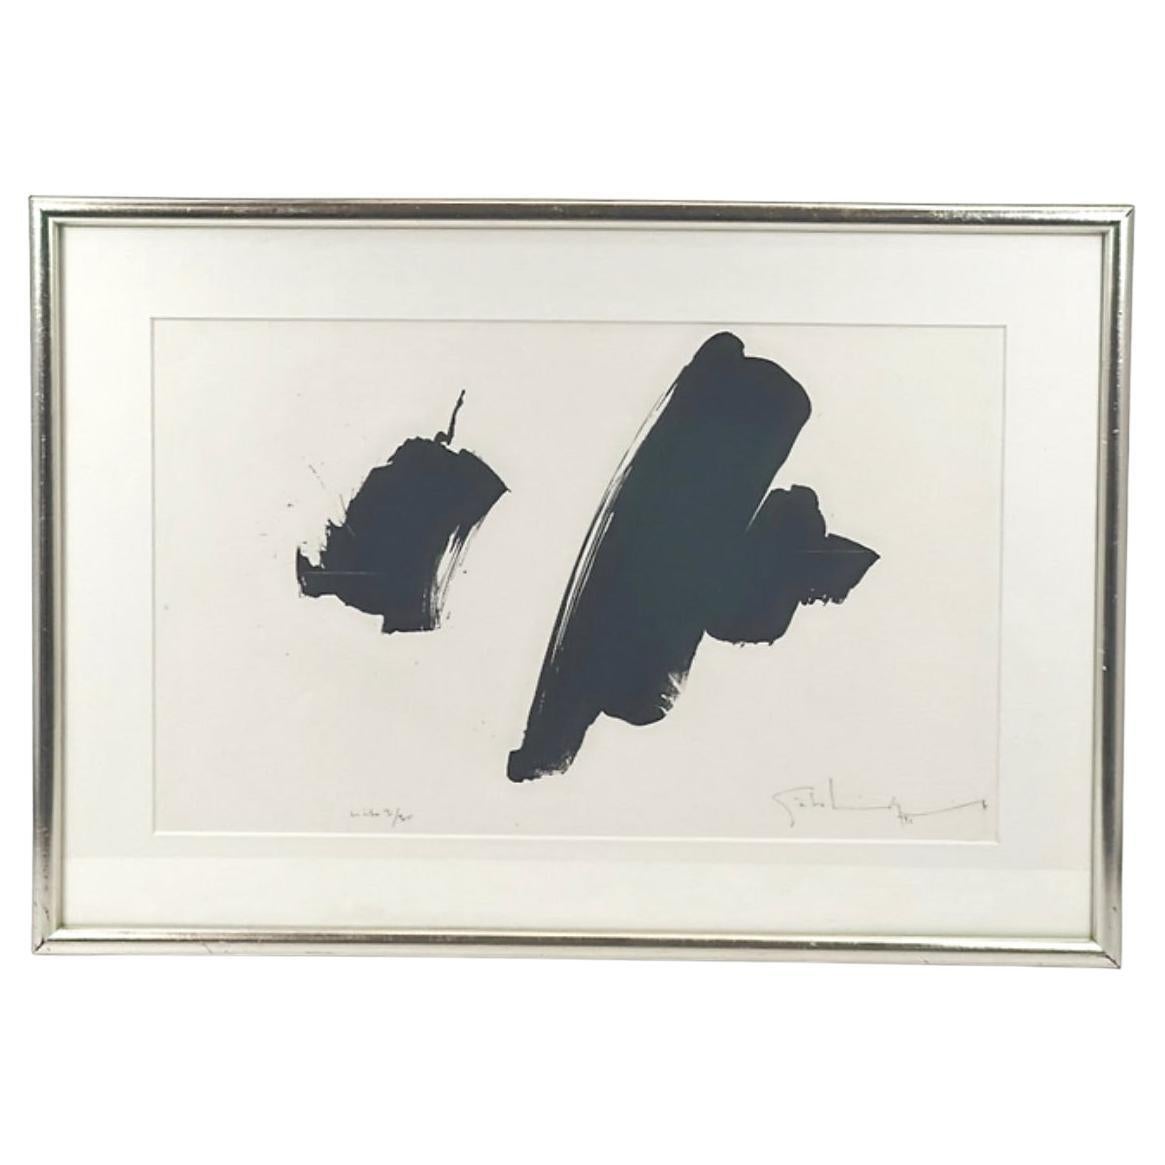 Framed Monochrome Lithograph By Gösta Lindqvist, Signed, Numbered 3/30 For Sale